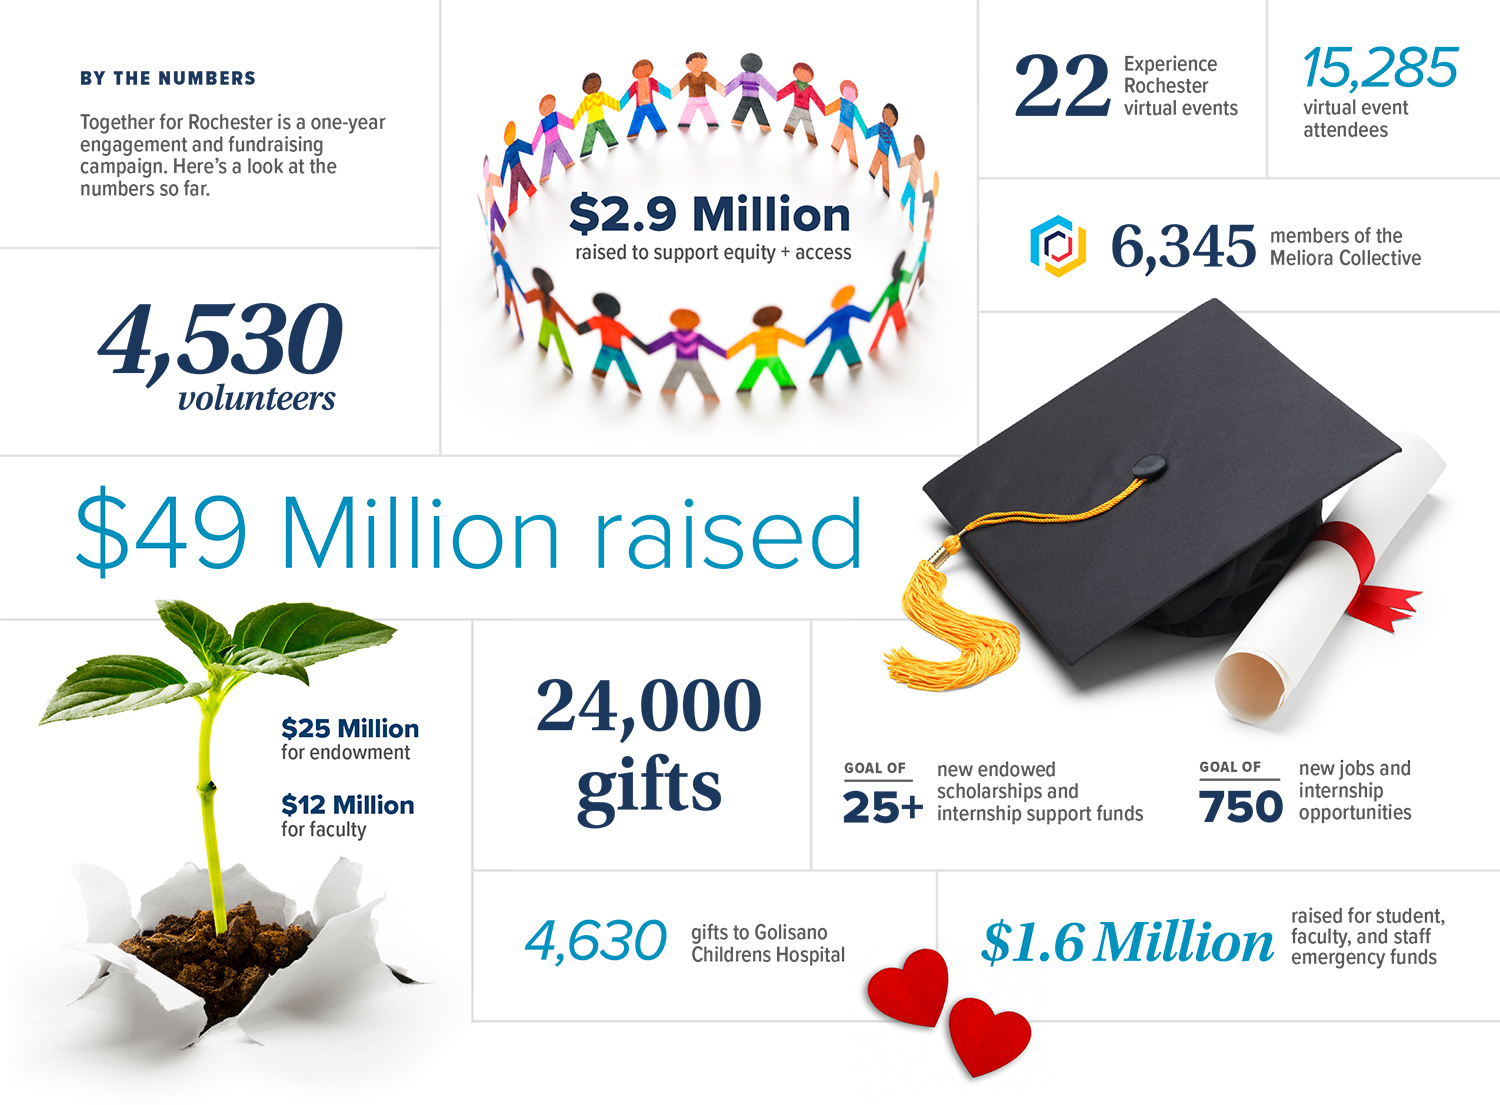 infographic for the Together for Rochester campaign that says $49 million raised, 4,500 volunteers, $2.9 million raised to support equity and access, 24,000 gifts, $25 million for the endowment, $12 million for faculty, $1.6 million raised for student, faculty, and staff emergency funds, 4,360 gifts for Golisano Children's Hospital, goal of 25+ in new endowed scholarships, goal of 750 new internship opportunities, 22 Expereince Rochester events, 15,285 virtual event attendees, 6,345 members of the Meliora Collective